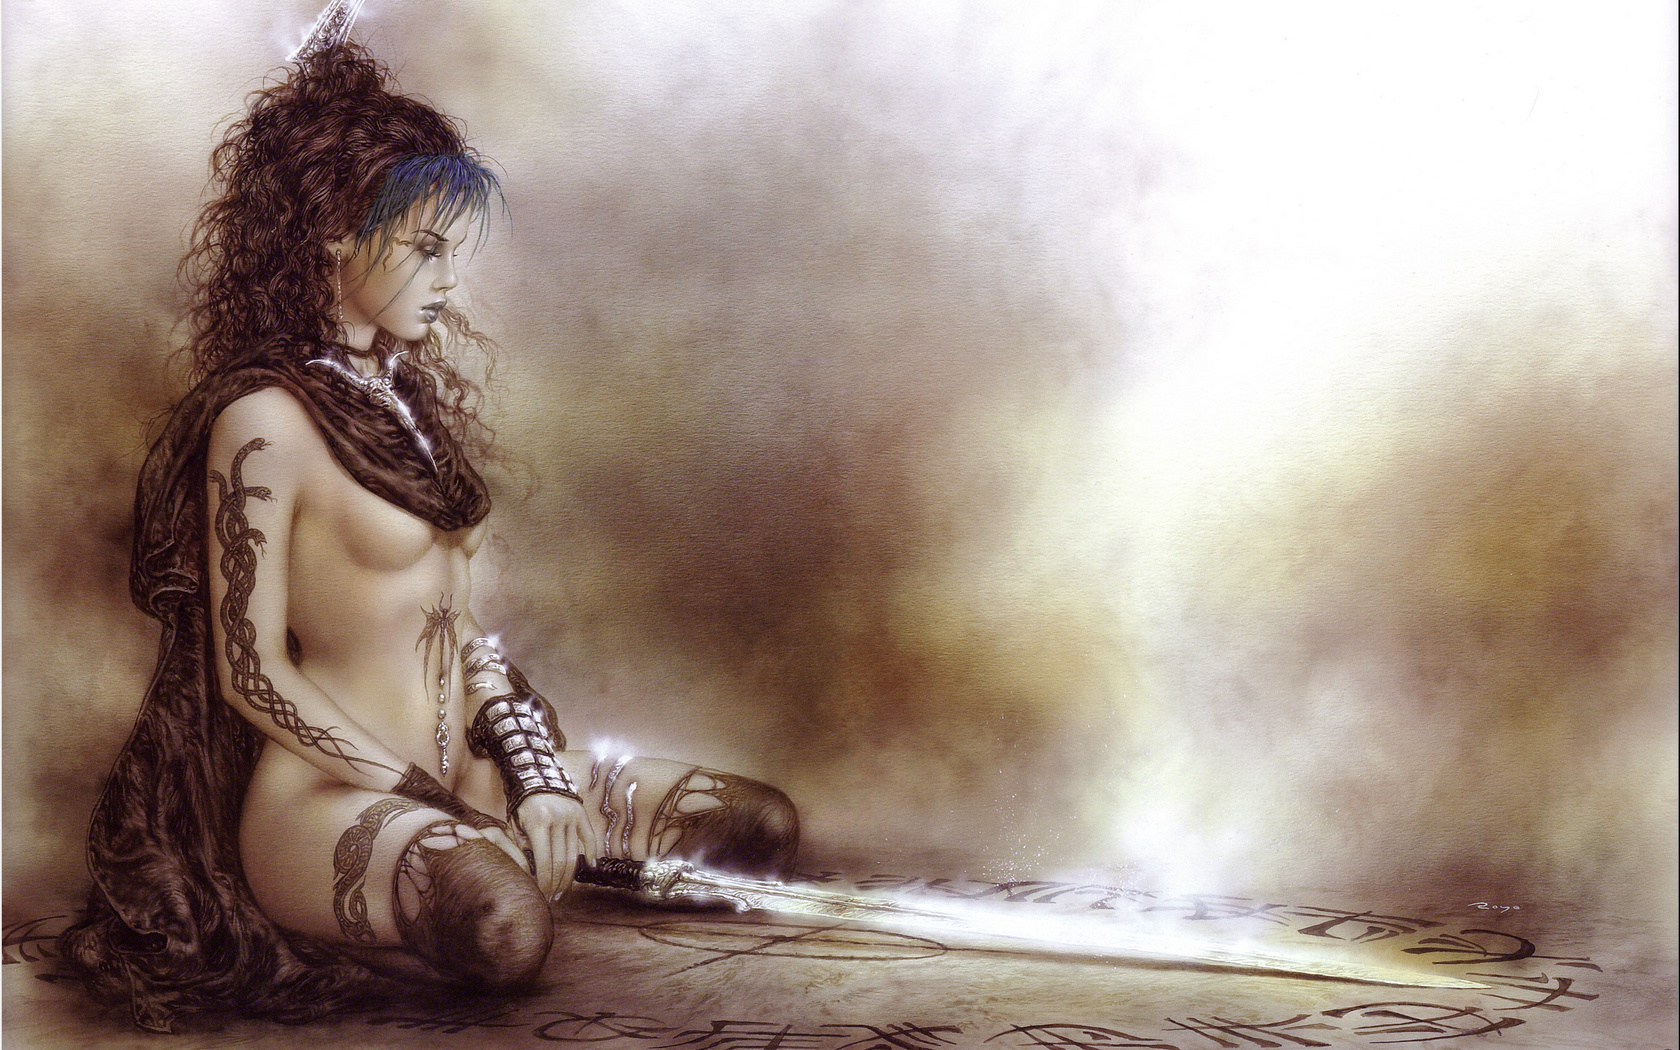 Luis Royo - Subversive Beauty - The Five Faces of Hecate 1 